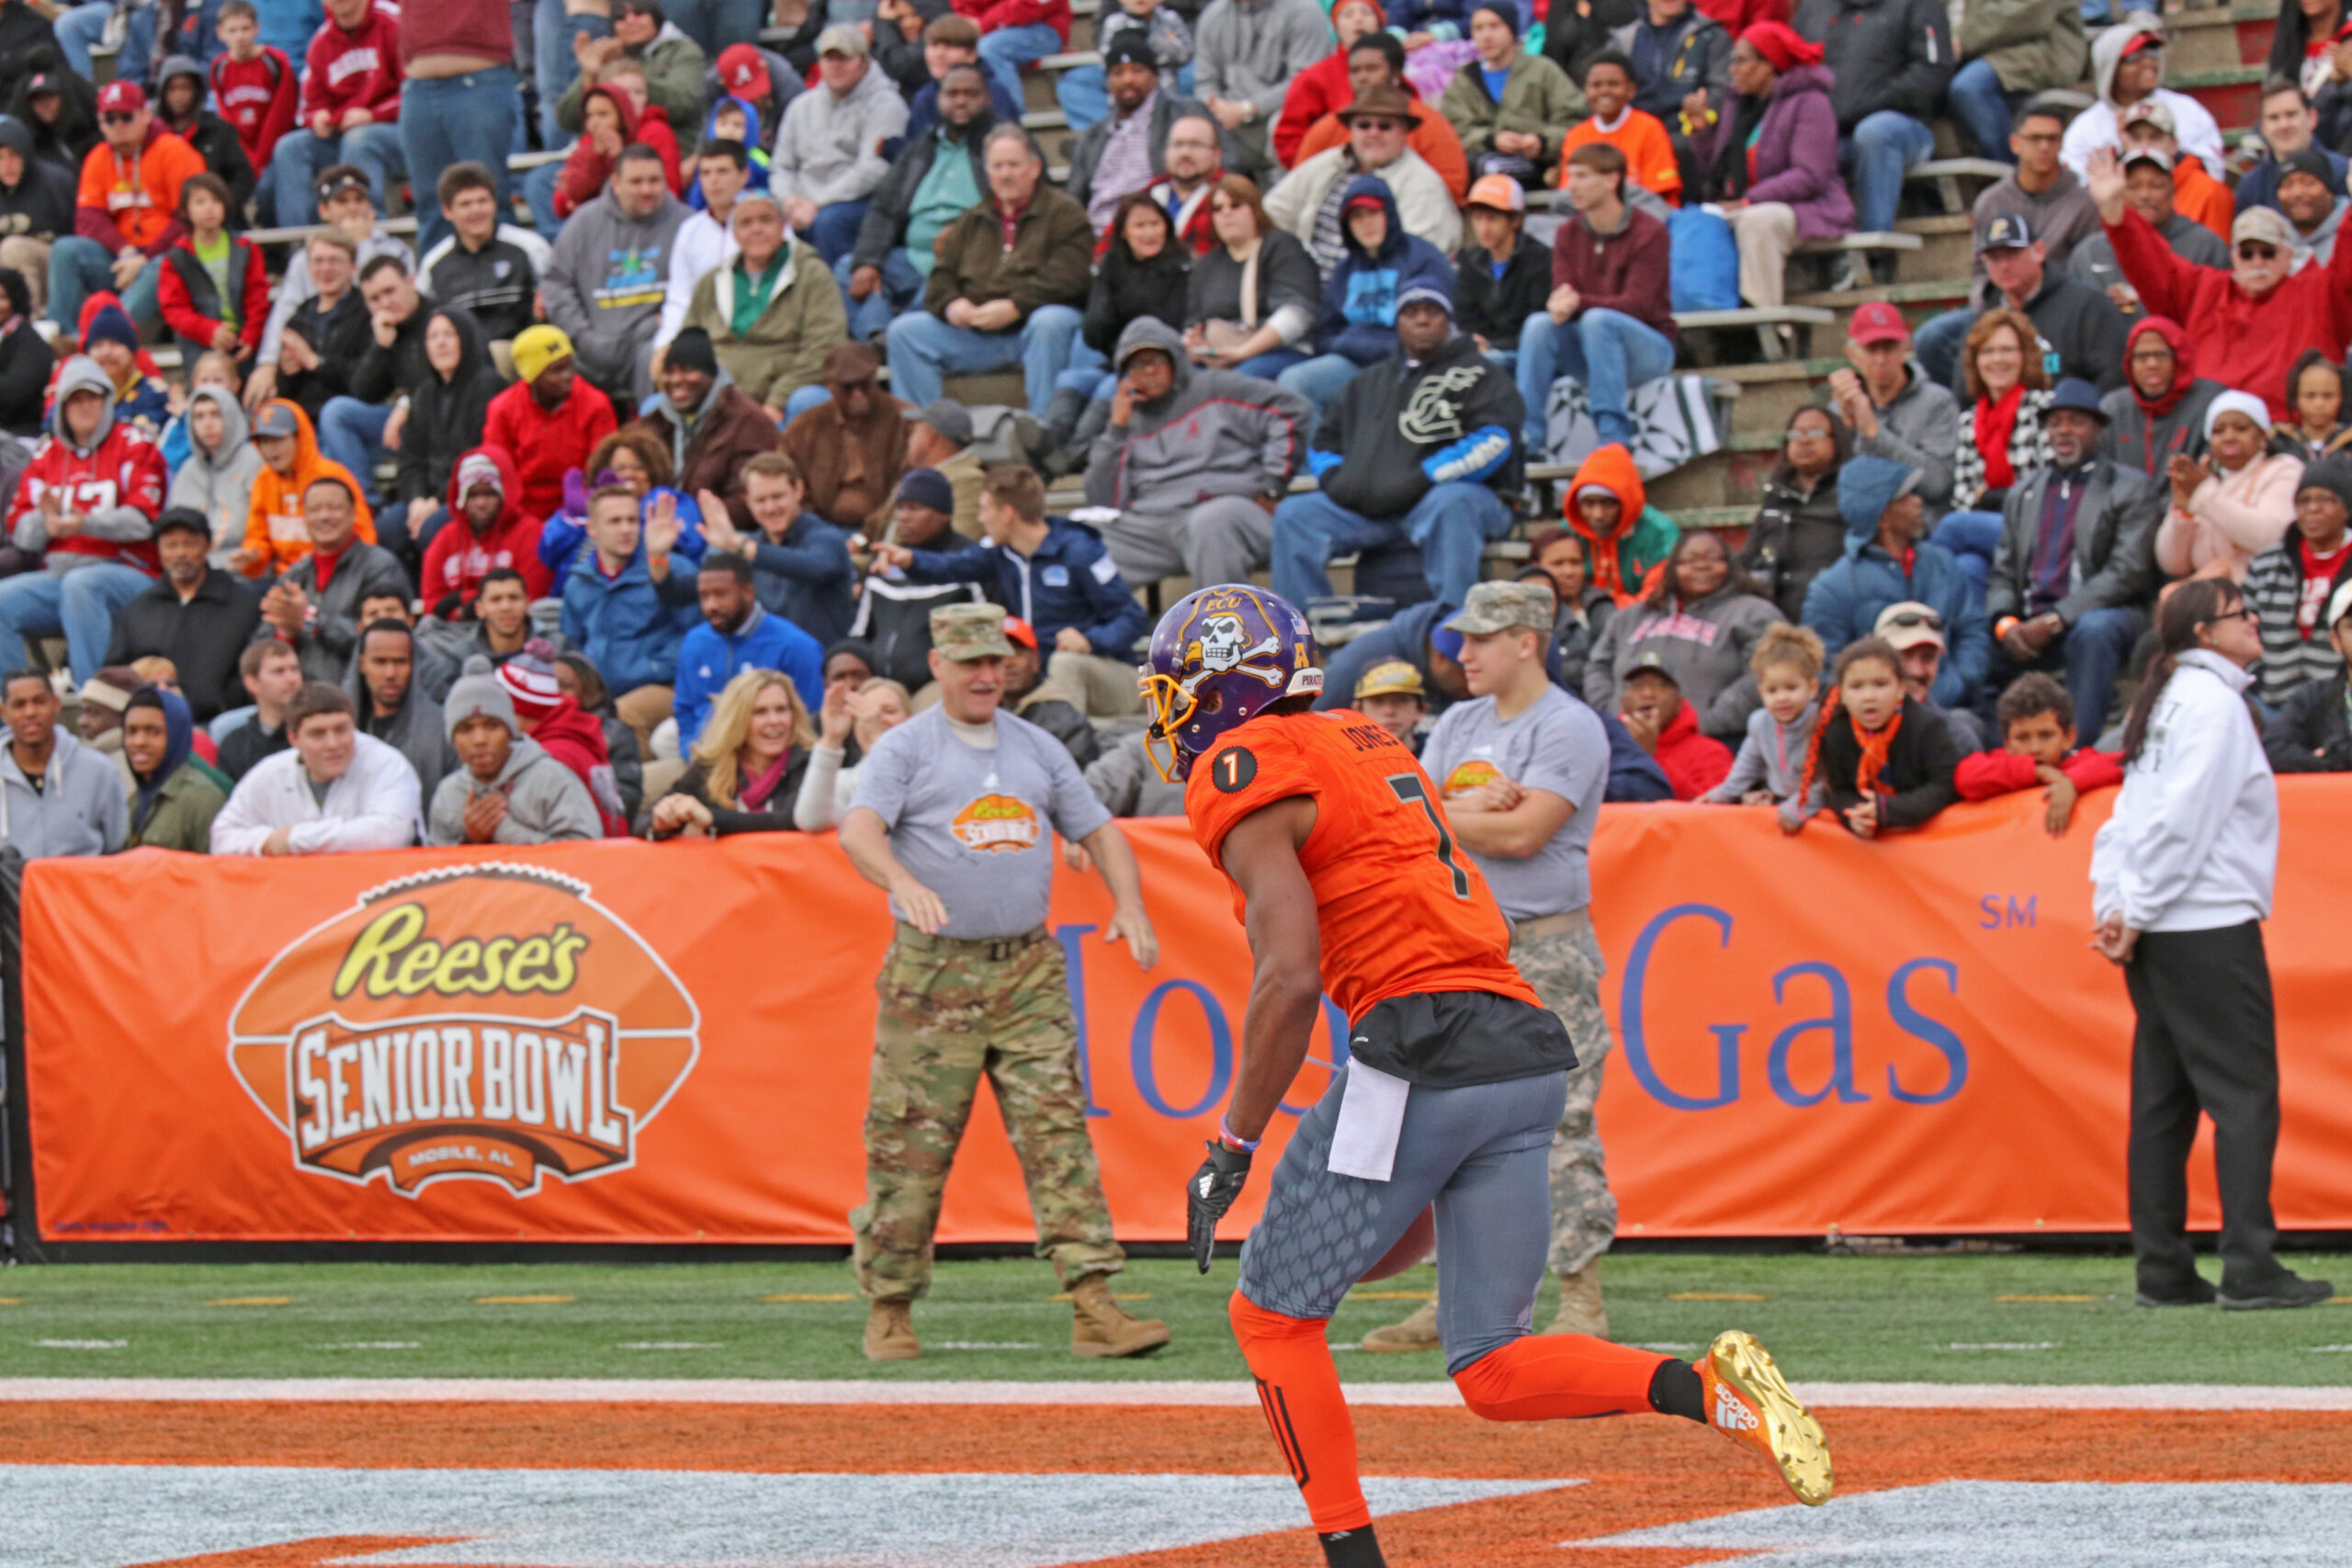 ECU wide receiver Zay Jones sprinting in the end zone during the 2017 Senior Bowl